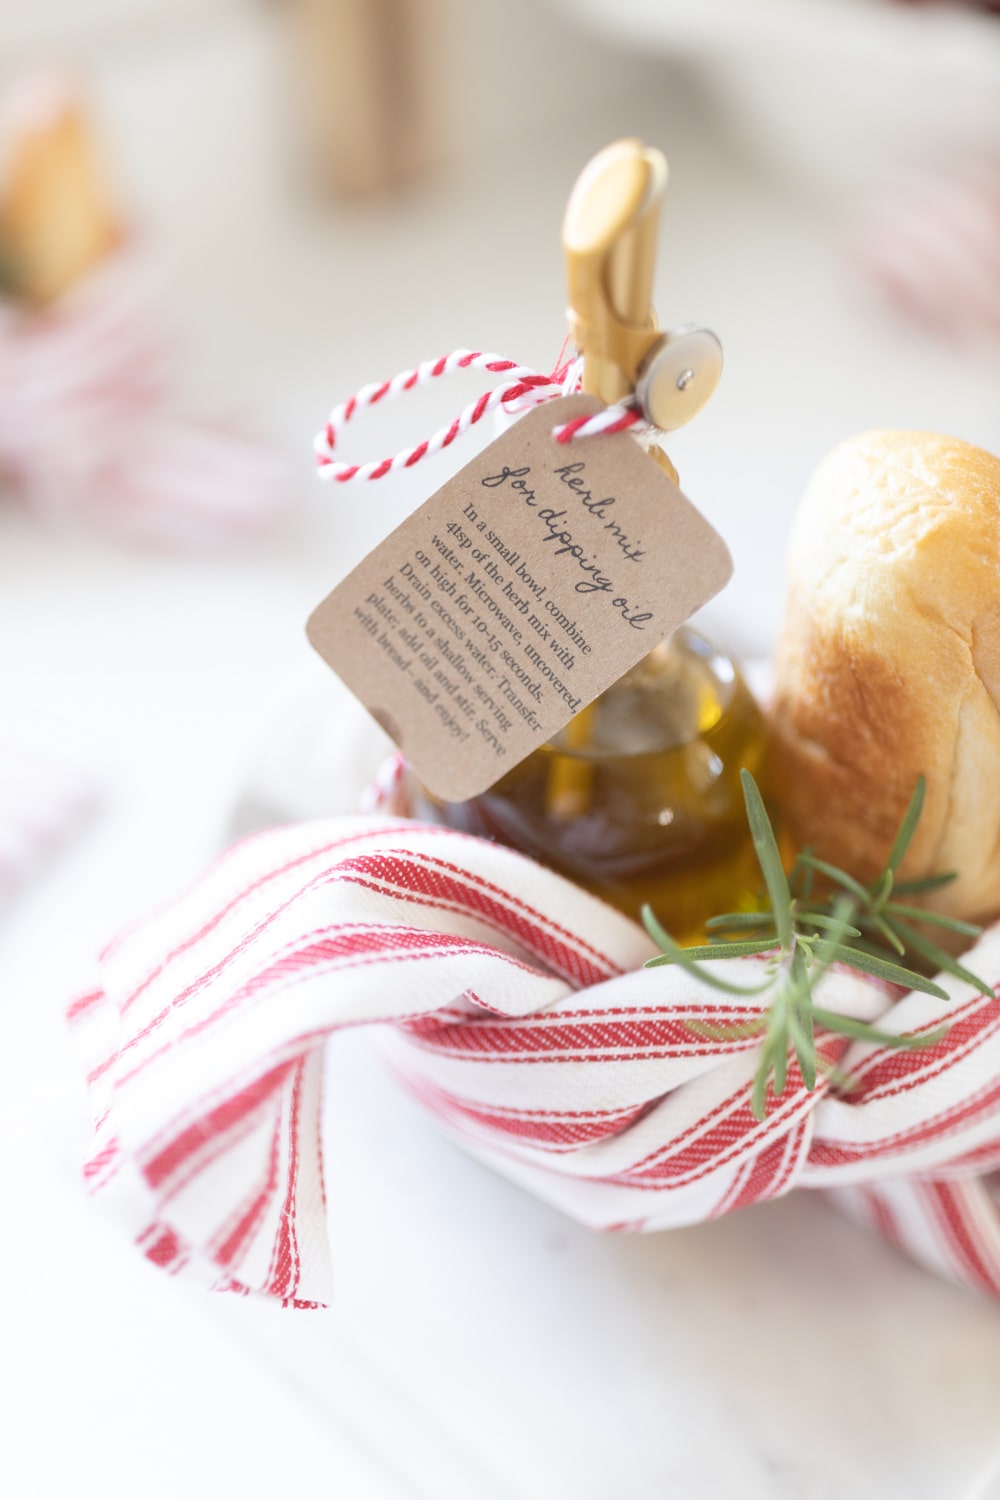 Blogger Stephanie Ziajka shares why this DIY olive oil gift set is one of the best unique DIY Christmas gift ideas on Diary of a Debutante